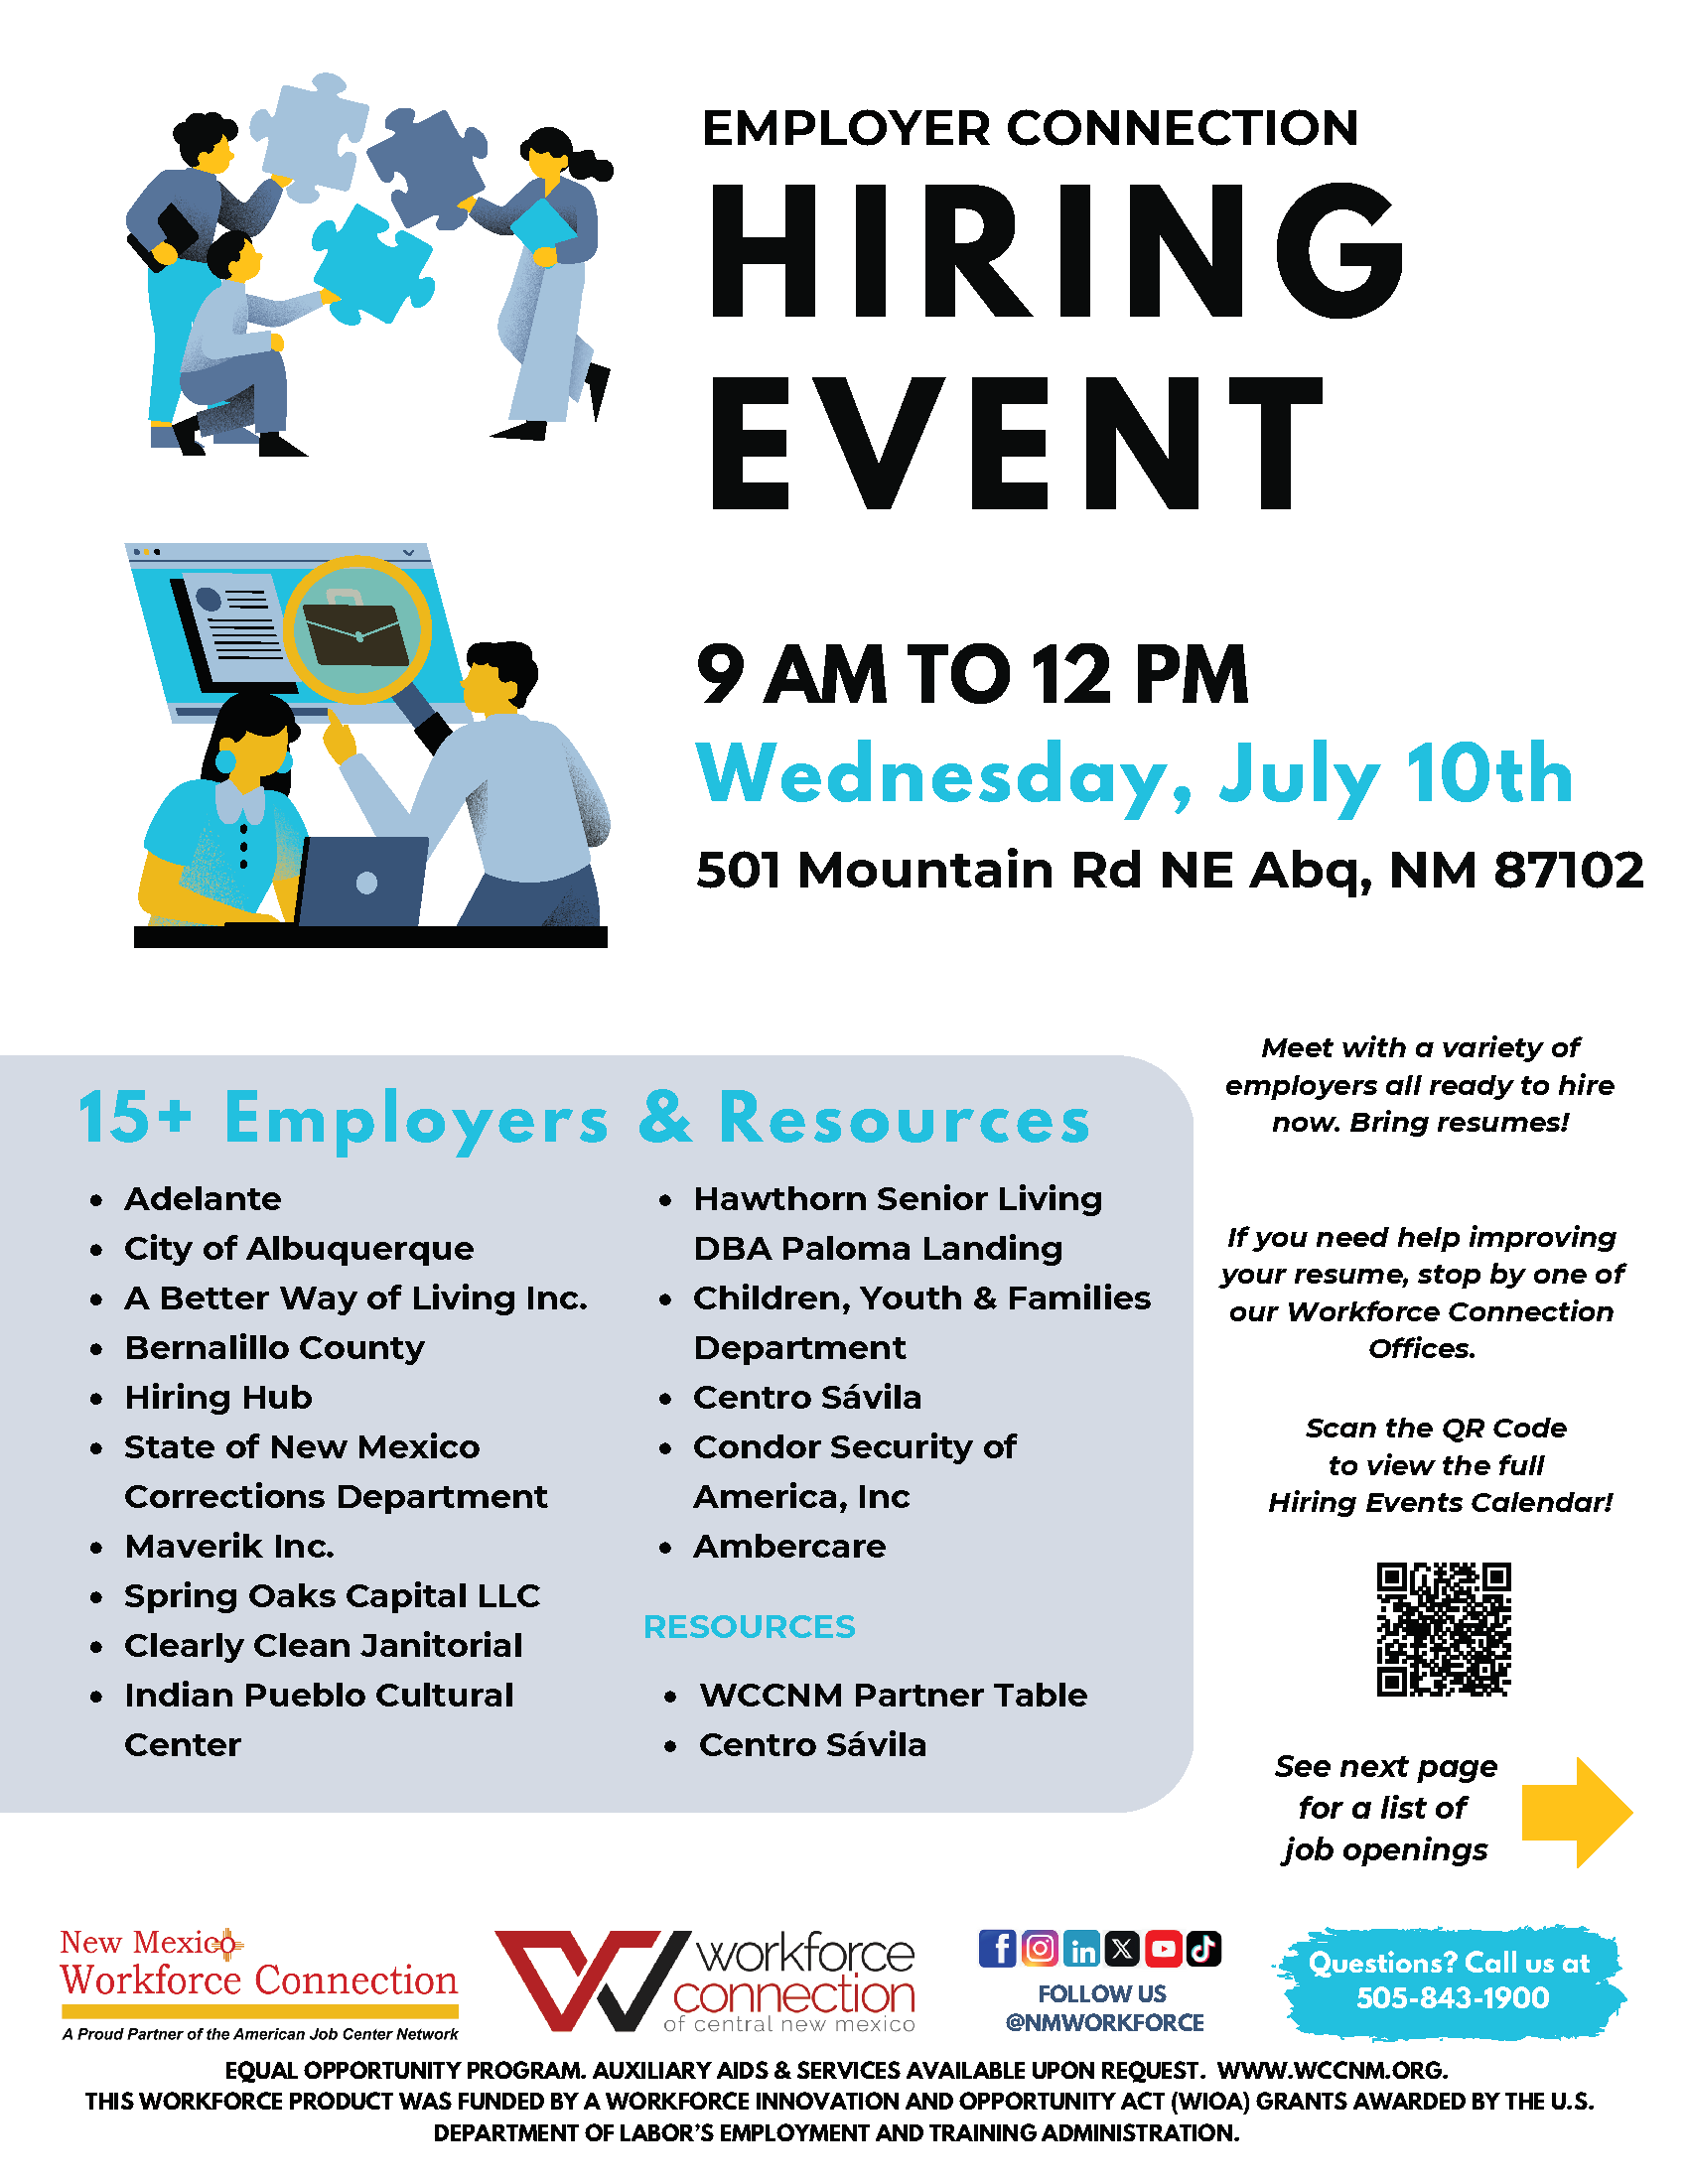 Employer Connection Hiring Event on Wednesday, July 10th